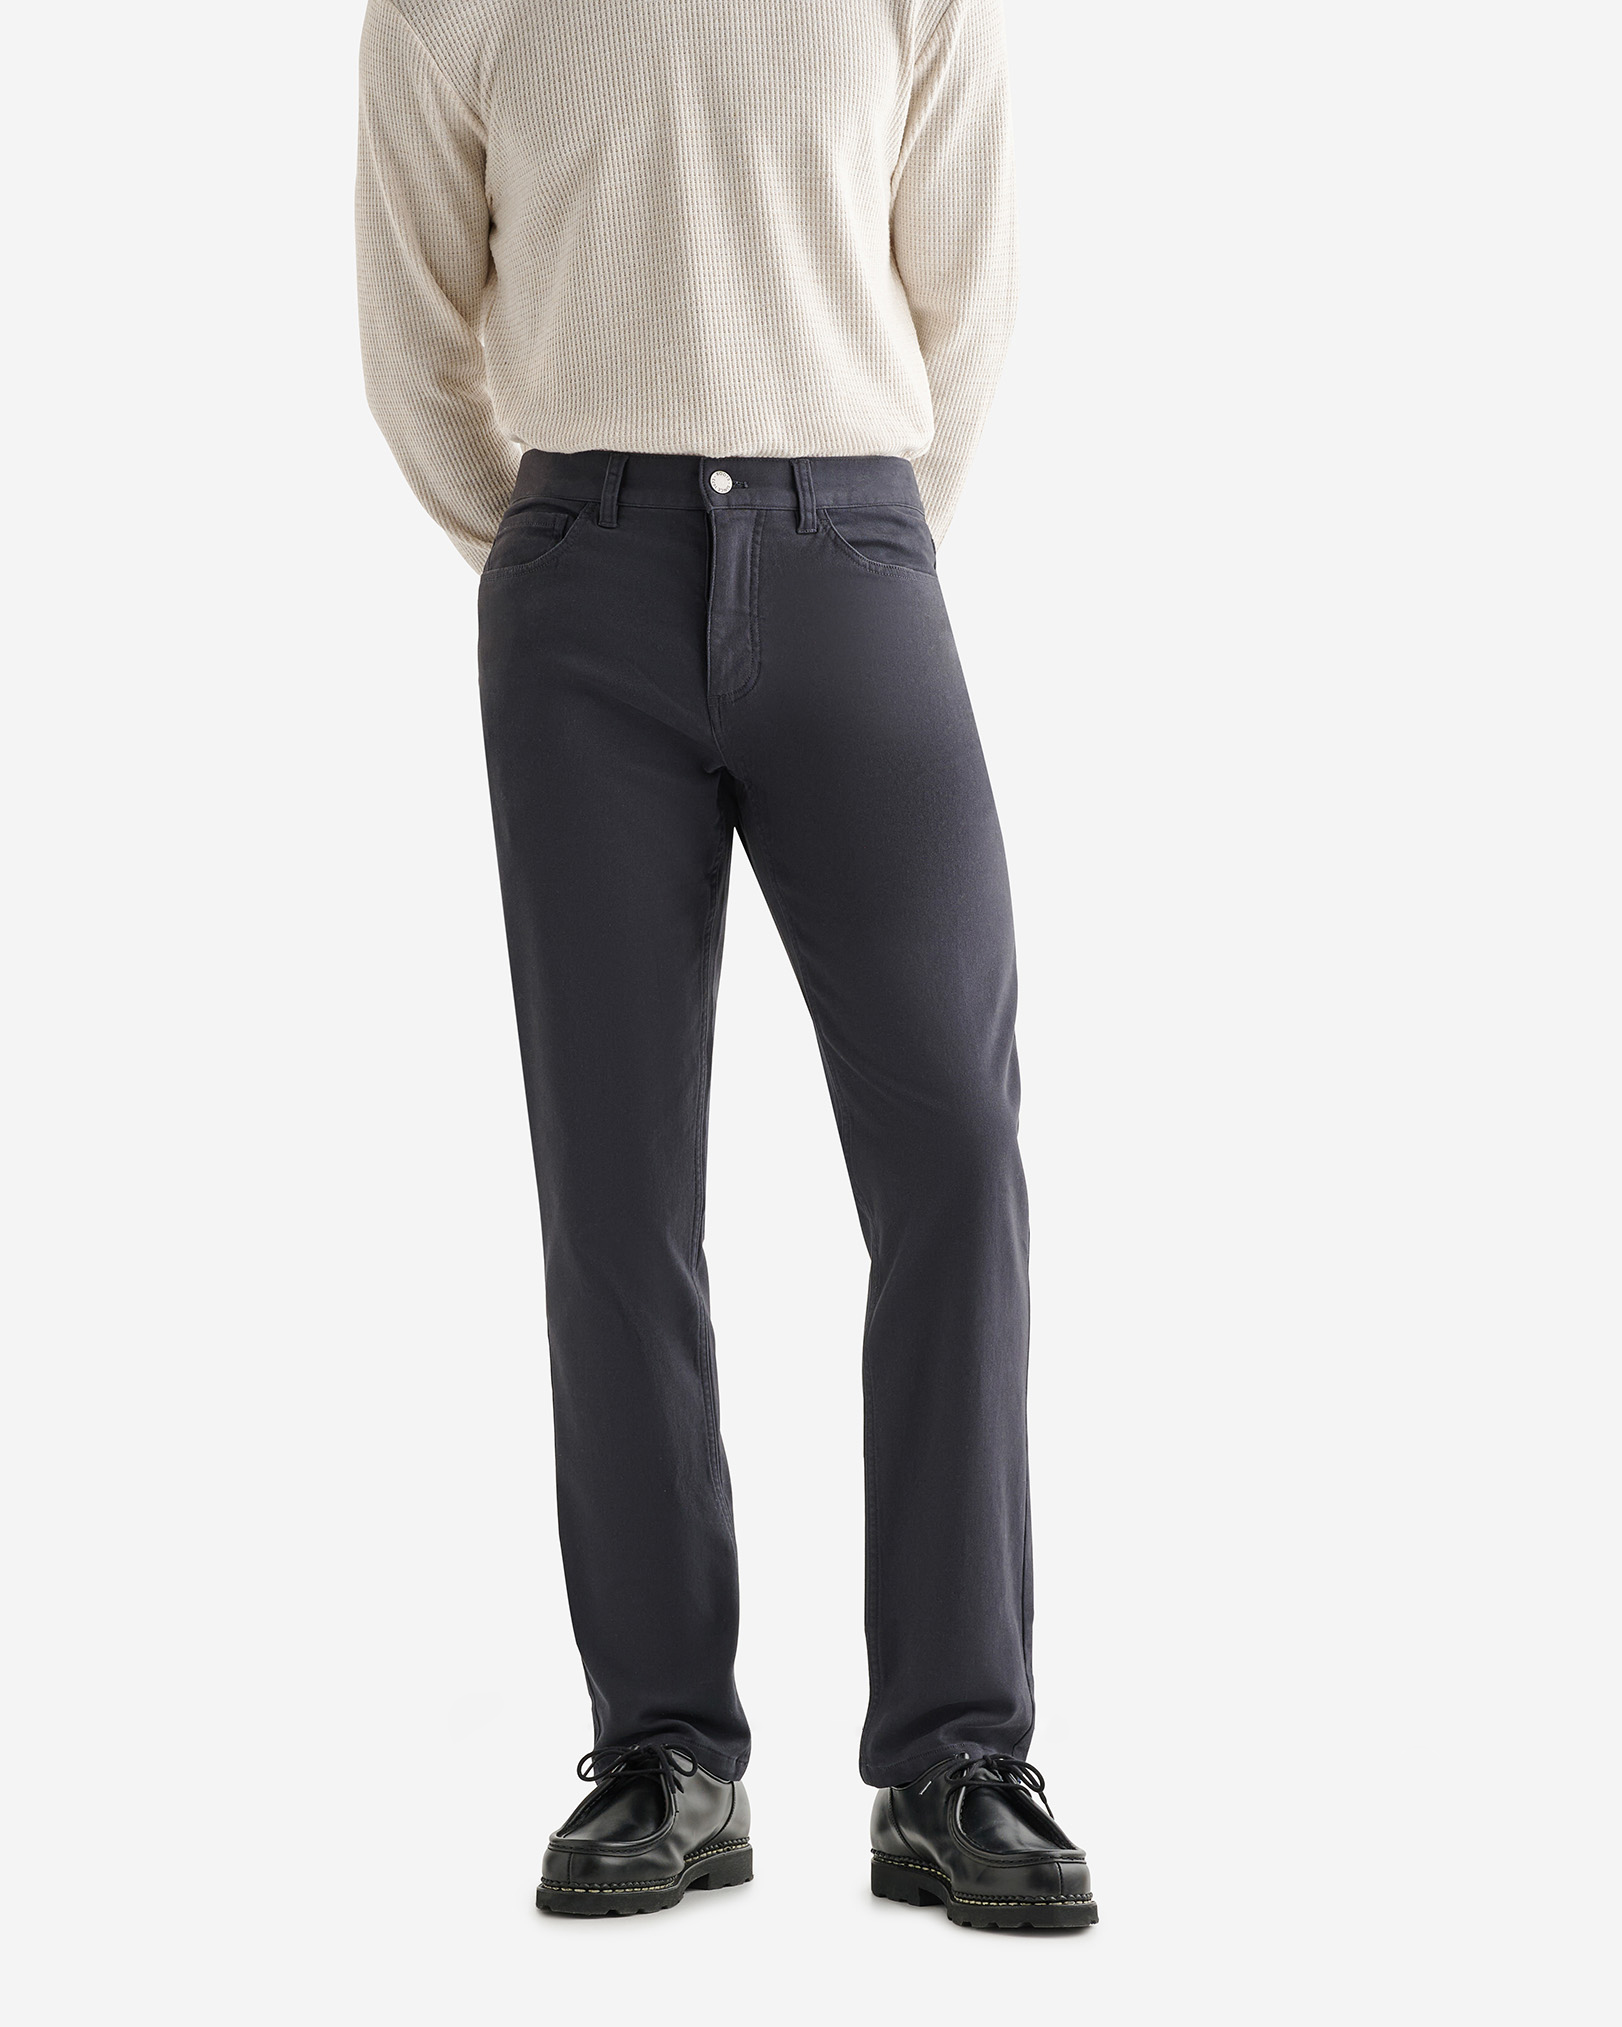 Roots Park Stretch 5 Pocket Pant in Graphite